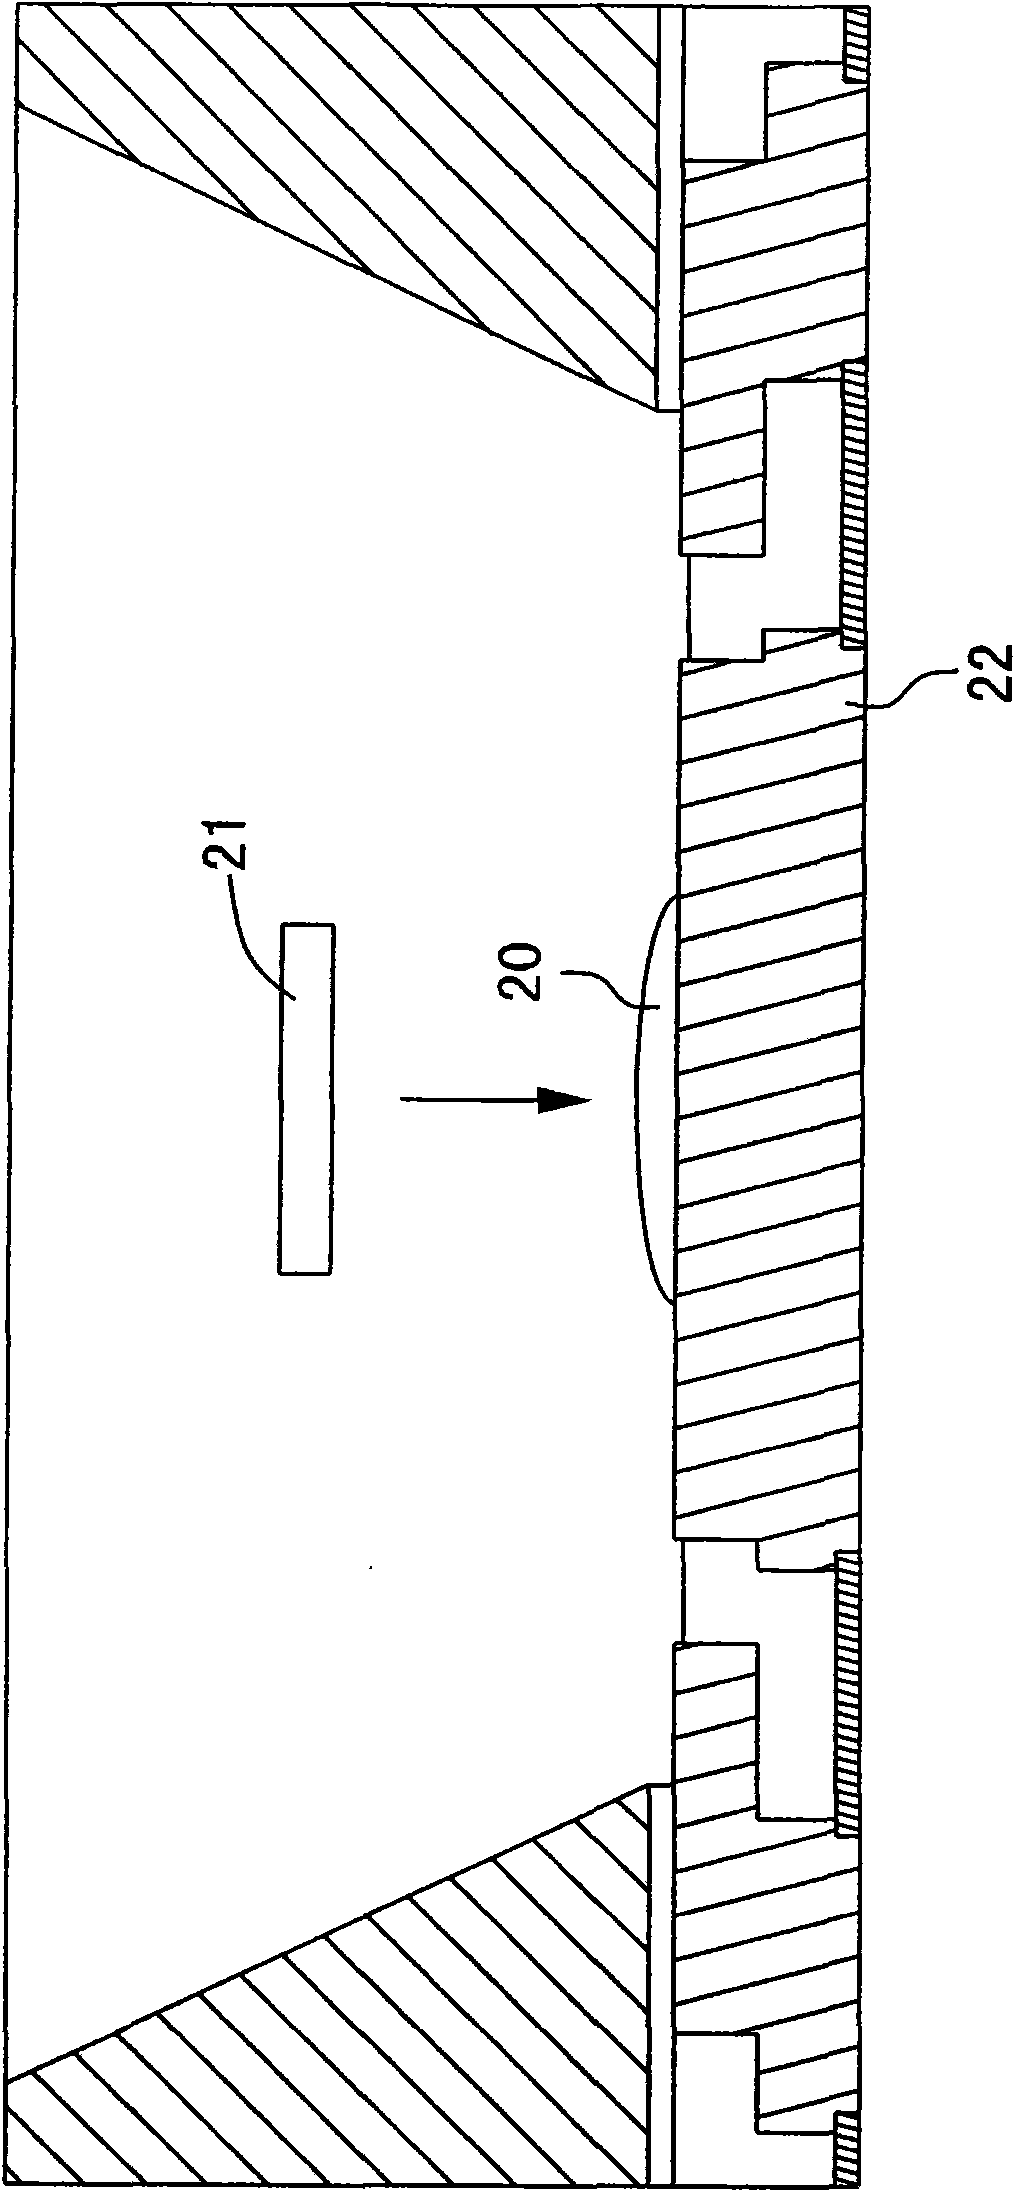 Method for forming die bonding connection structure of reflective LED at low temperature